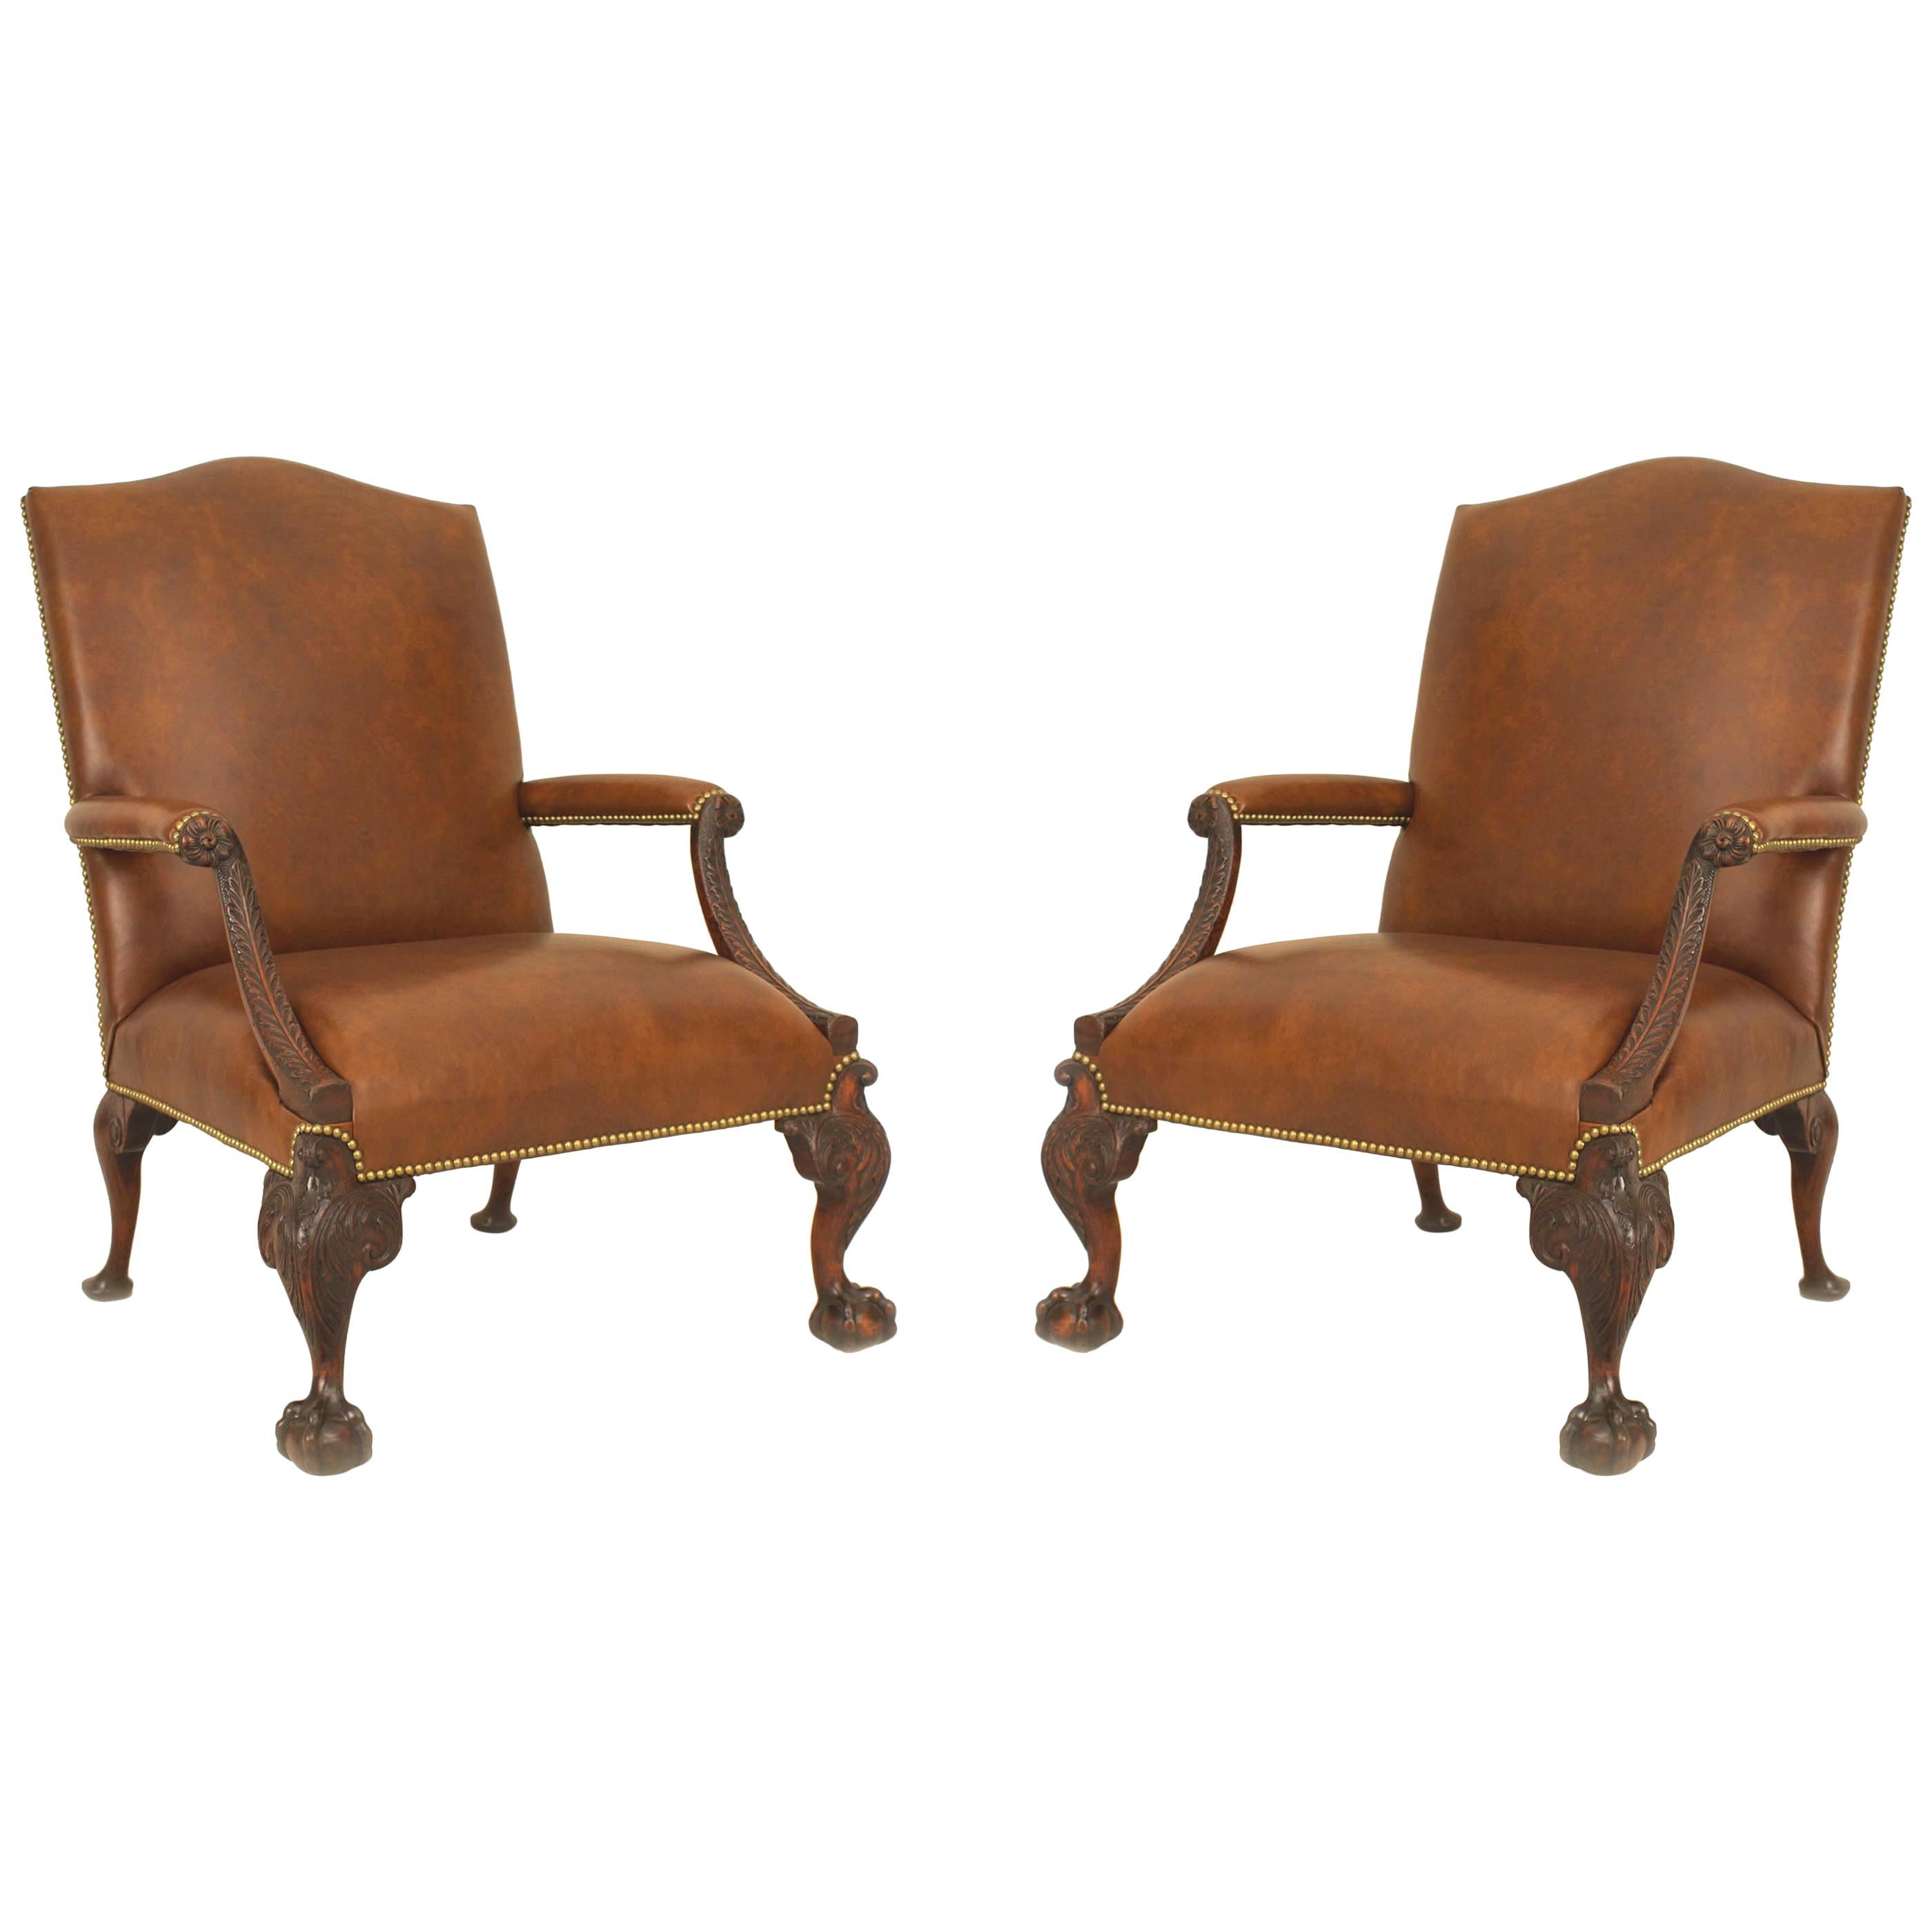 Pair of English Chippendale '18th Century' Large Gainsborough Library Chairs